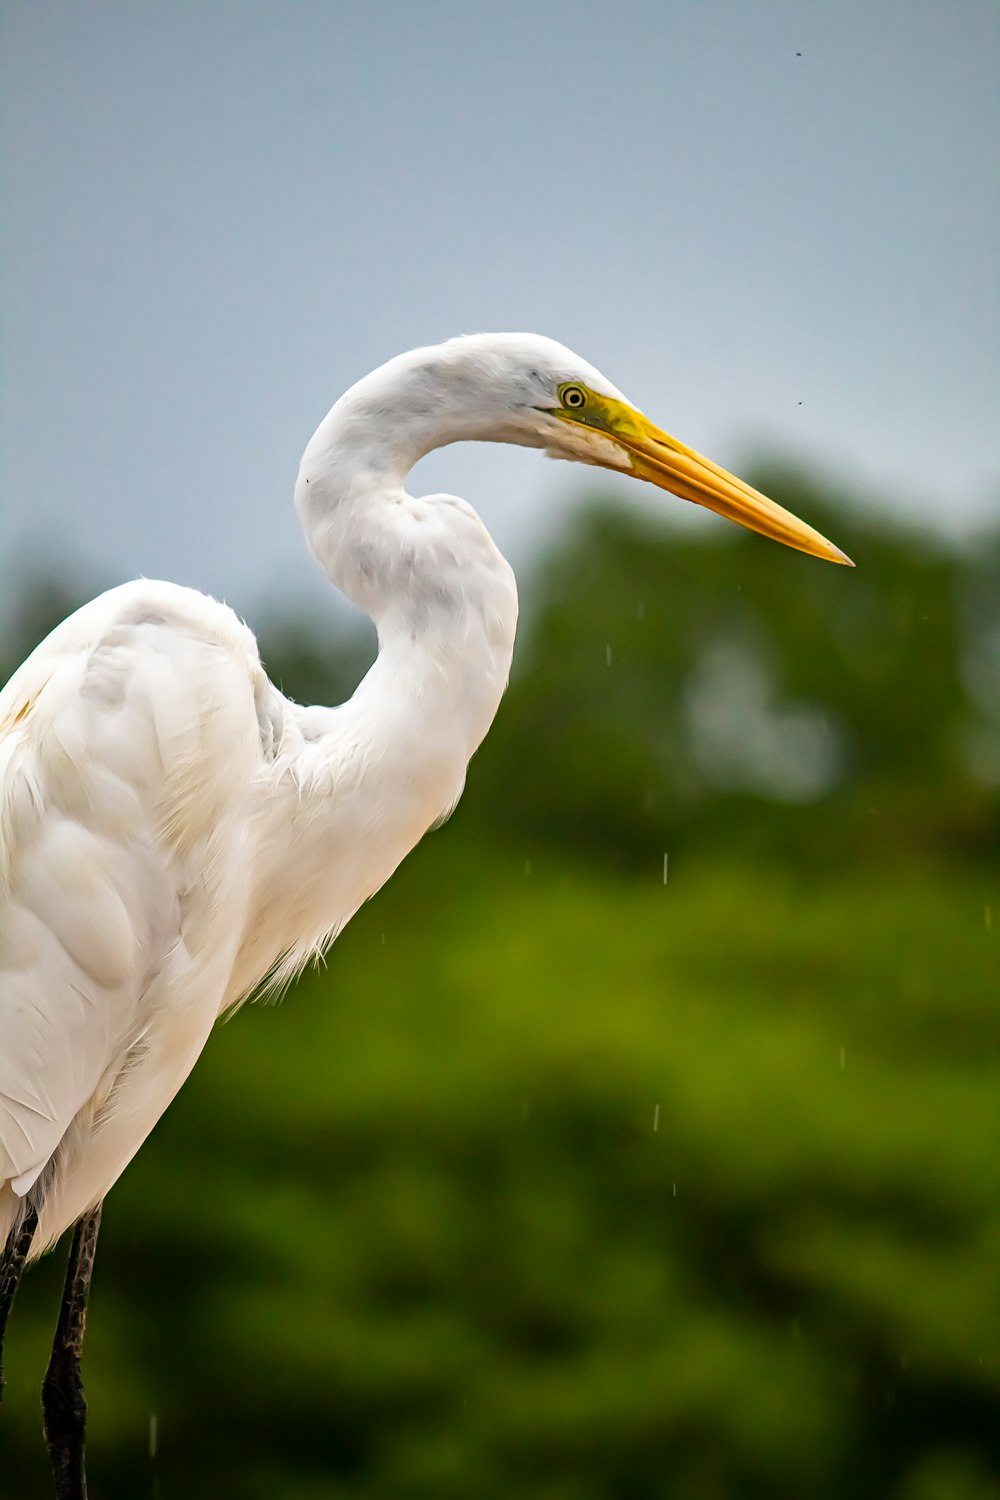 a large white bird with a long yellow beak